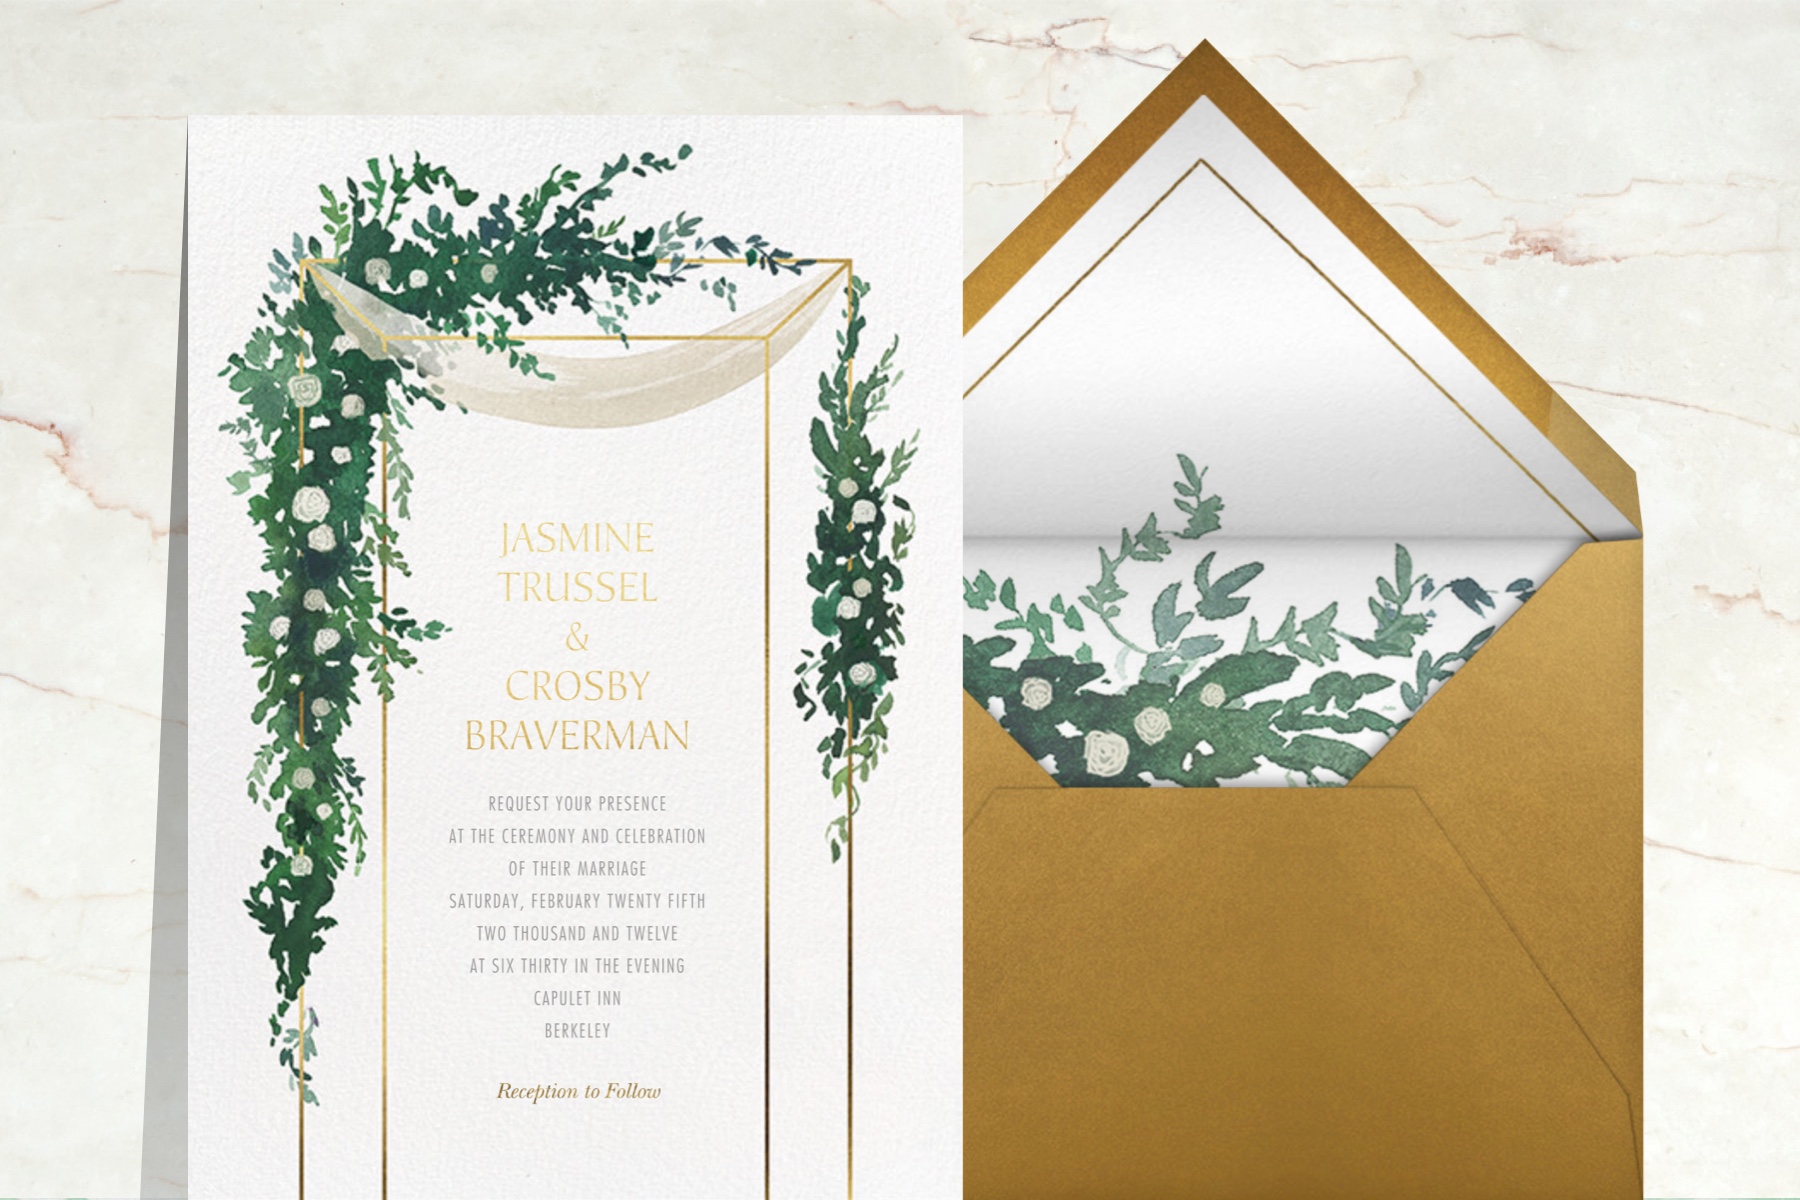 How to save on wedding invitations